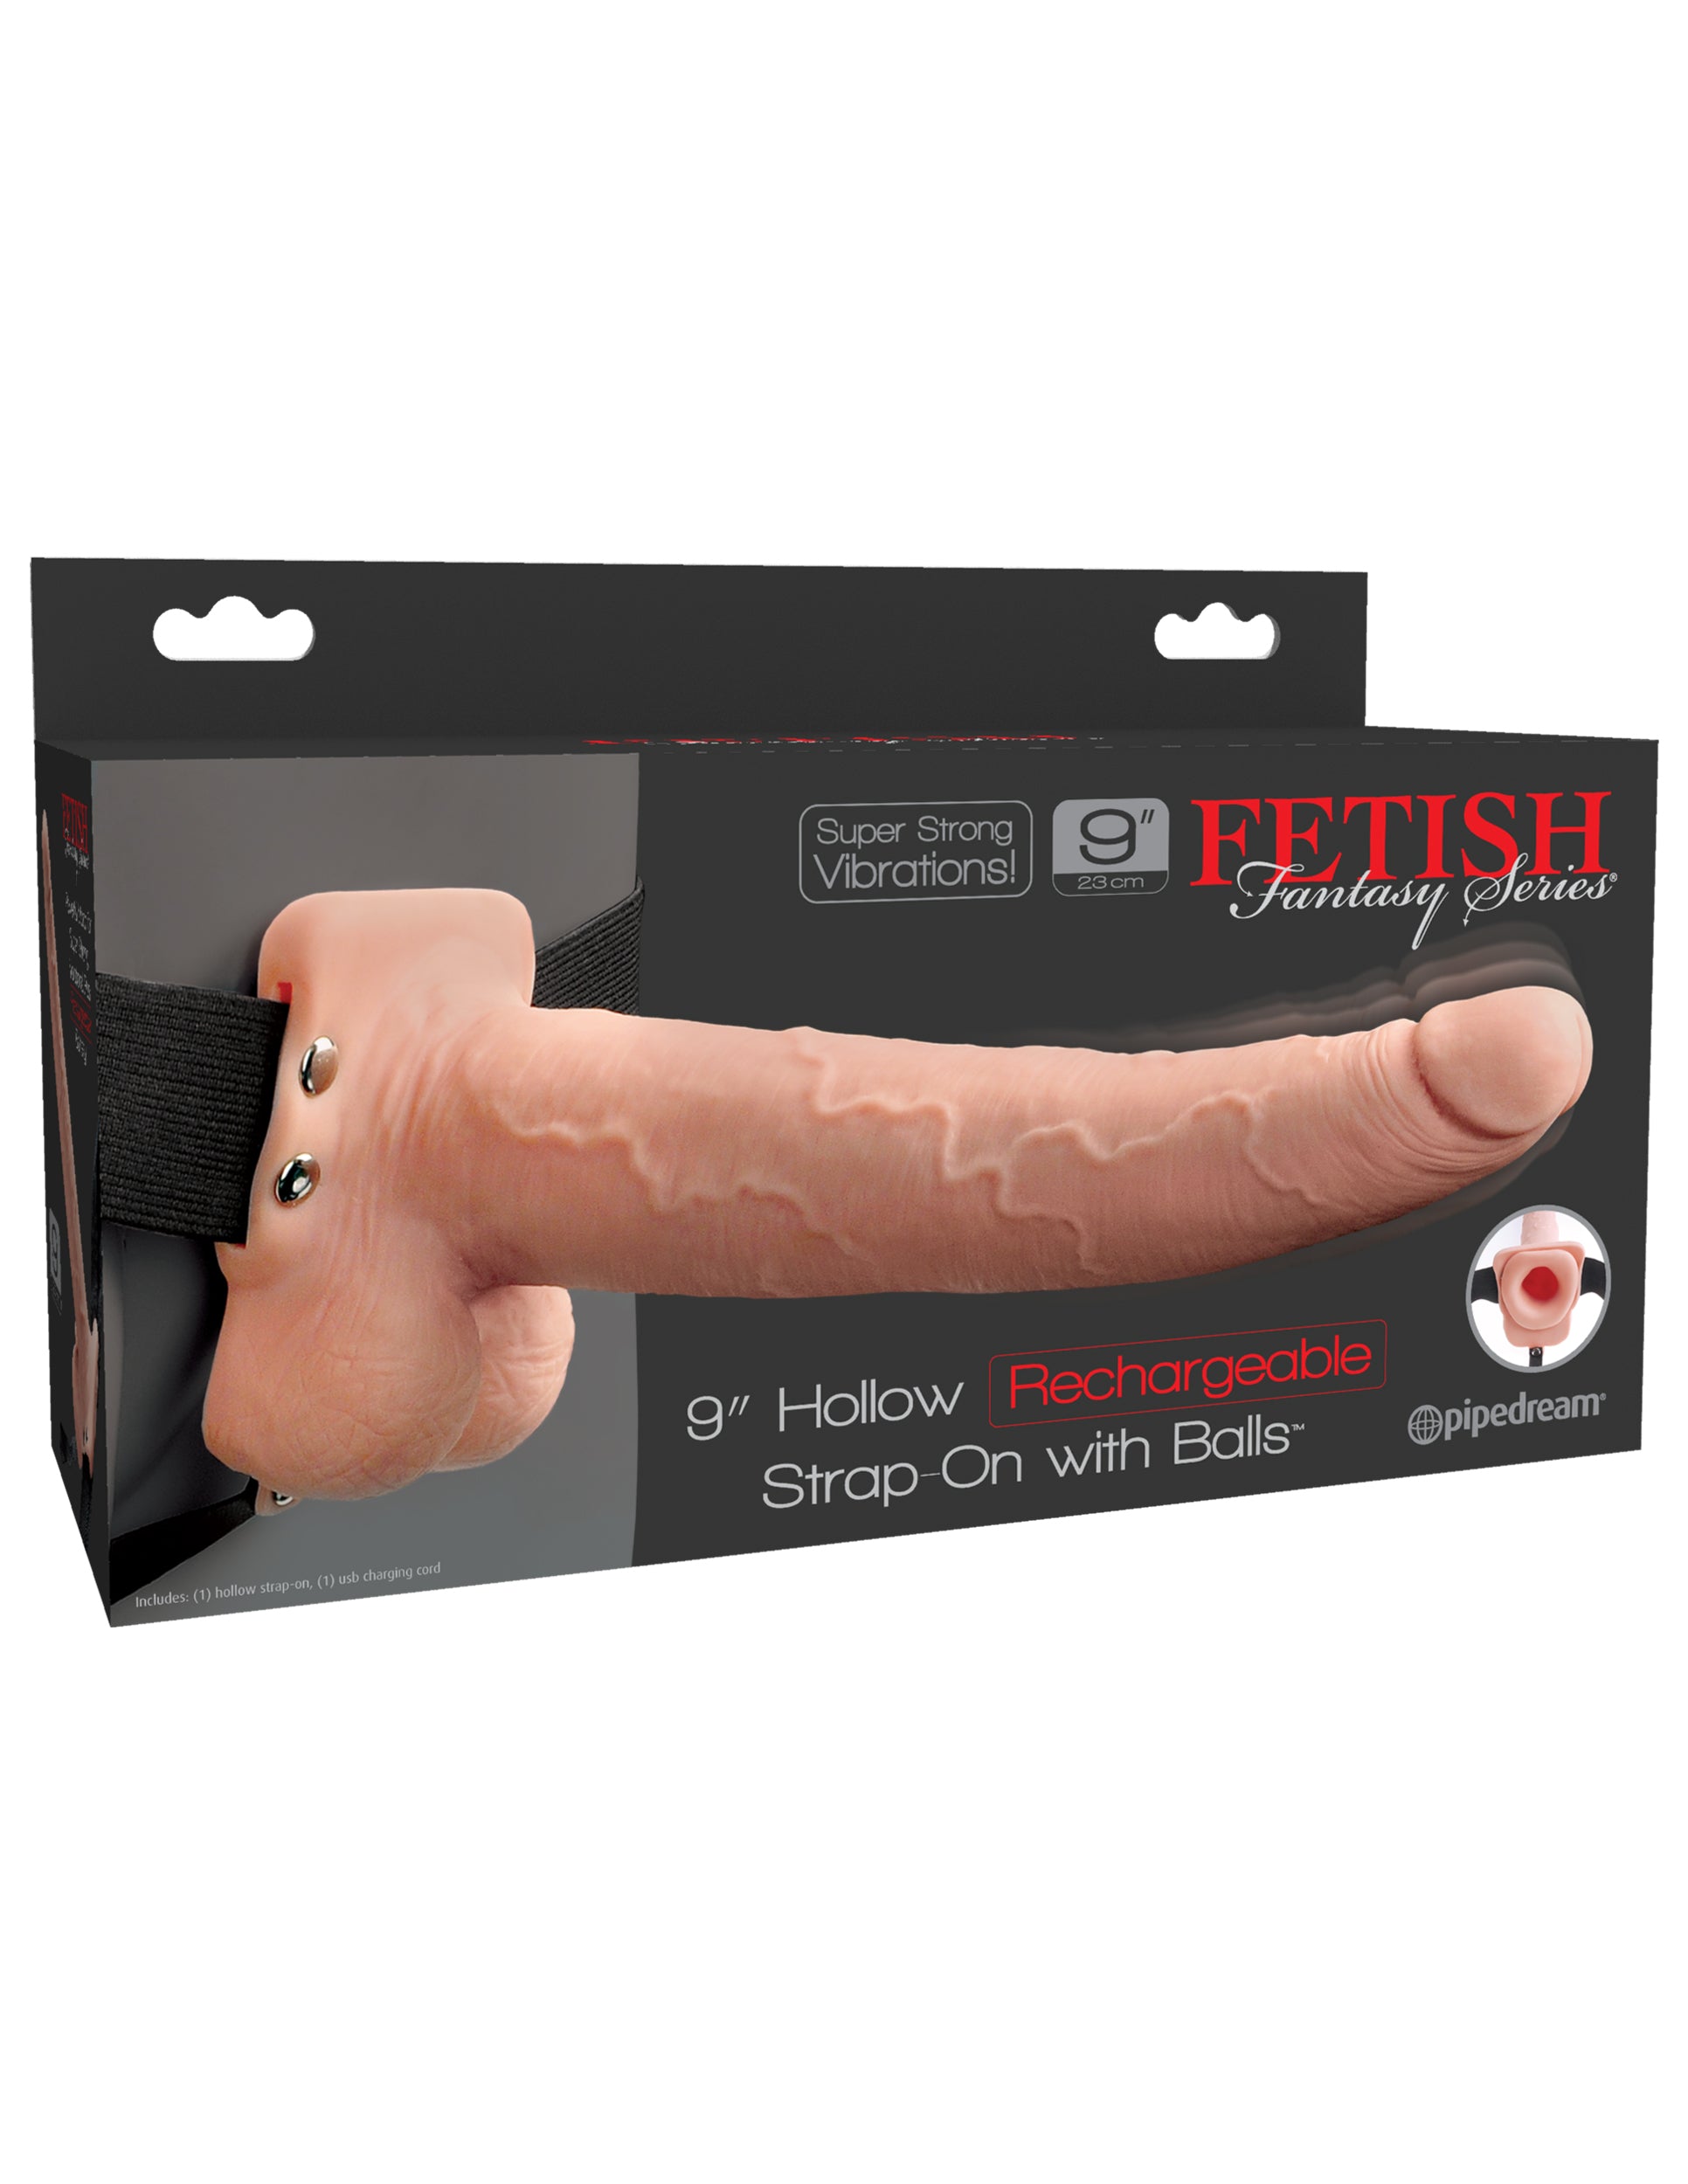 Fetish Fantasy Series 9 Inch Hollow Rechargeable Strap-on With Balls - Flesh-0